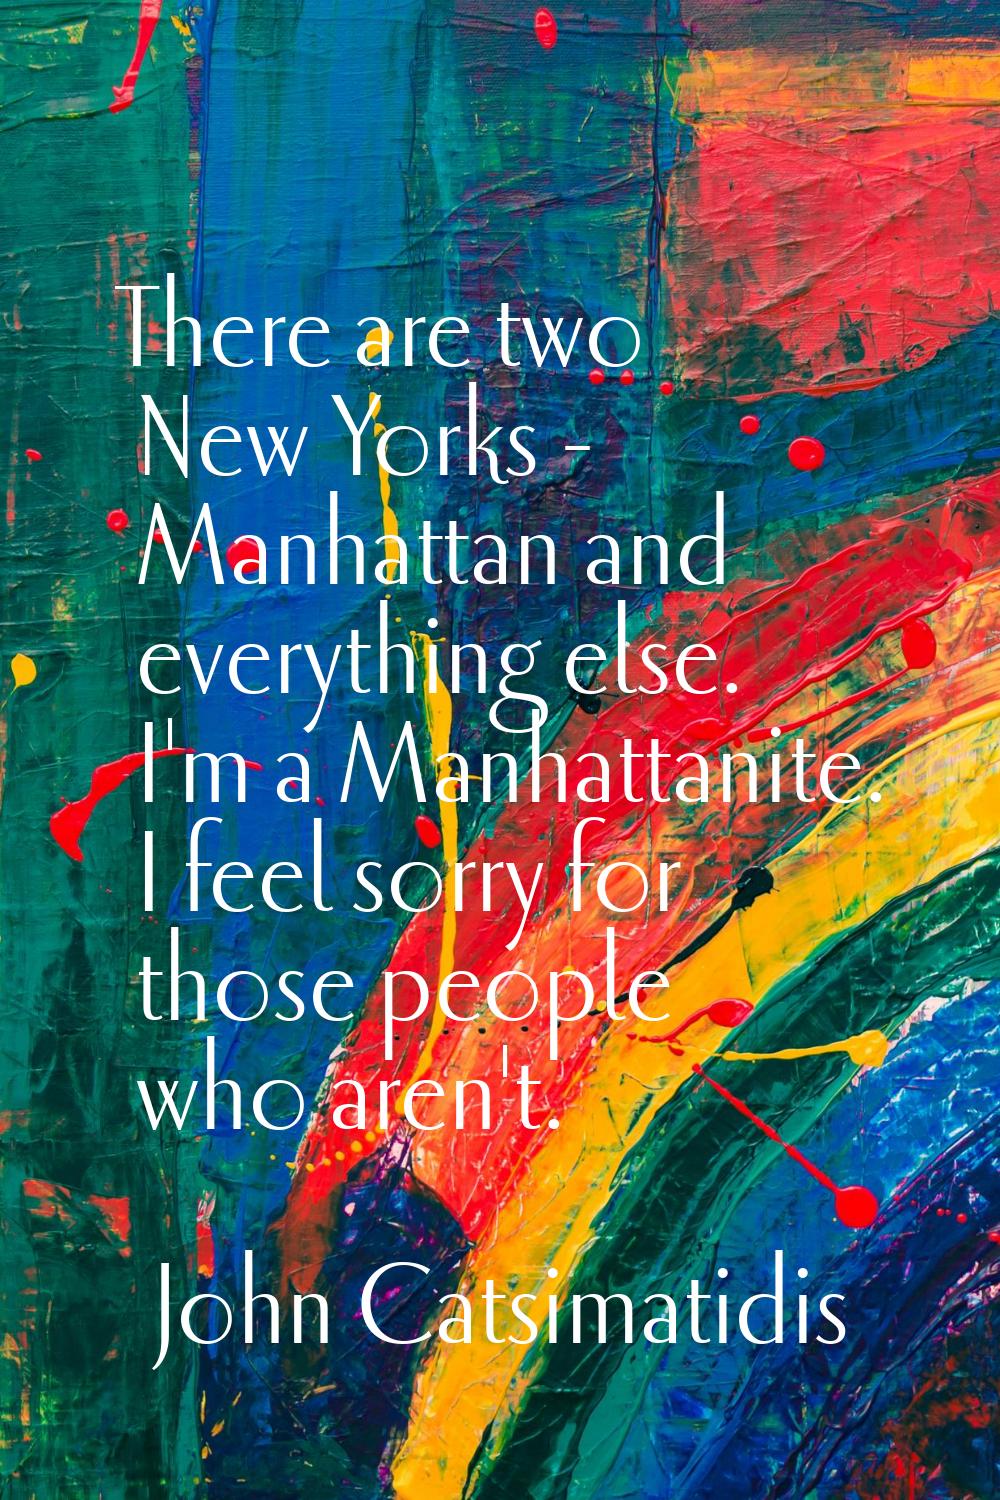 There are two New Yorks - Manhattan and everything else. I'm a Manhattanite. I feel sorry for those